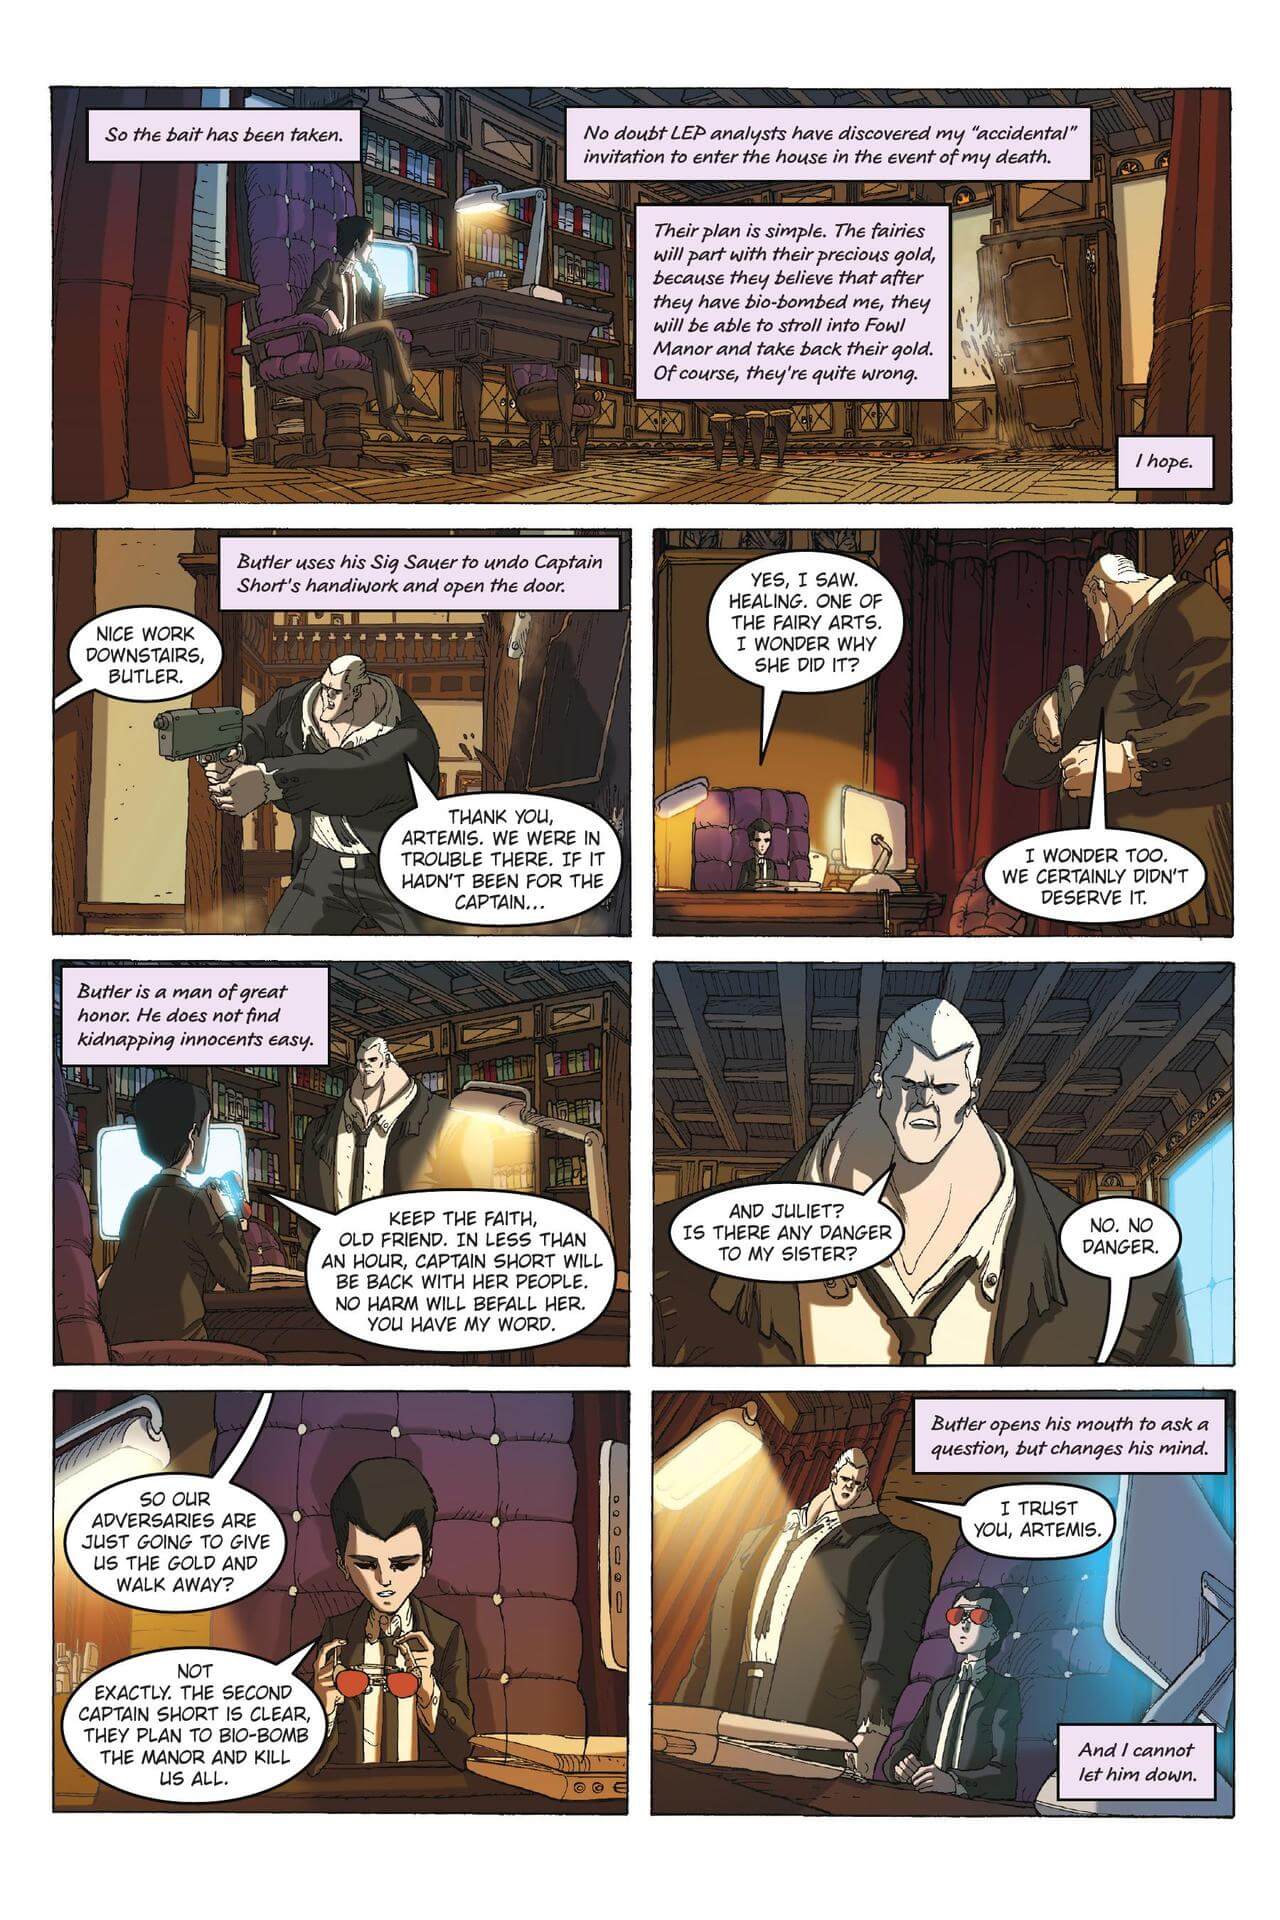 page 99 of artemis fowl the graphic novel